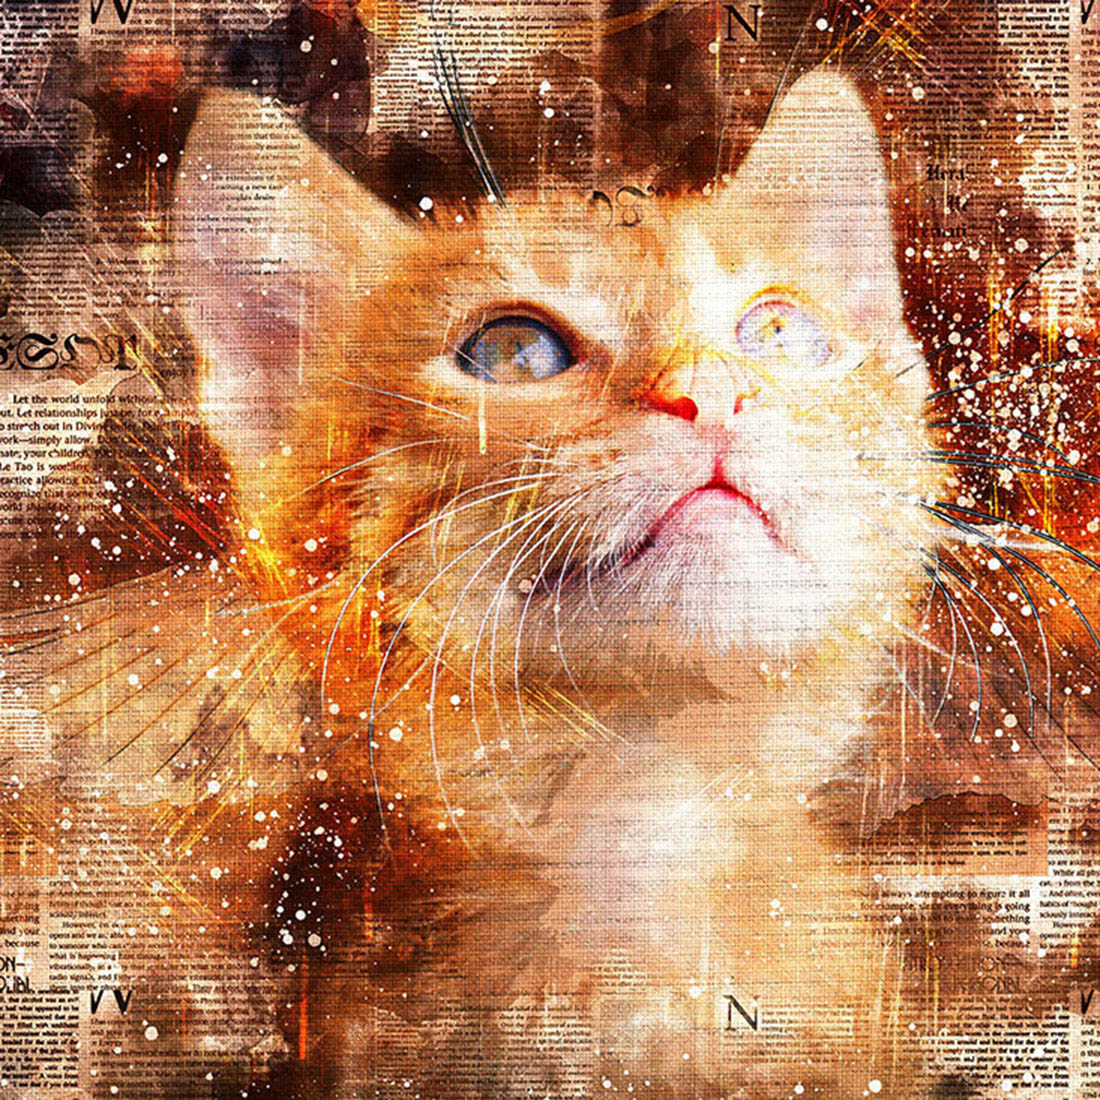 Bundle of 12 Kittens HQ Graphics Ready to Print with Text Style cover image.